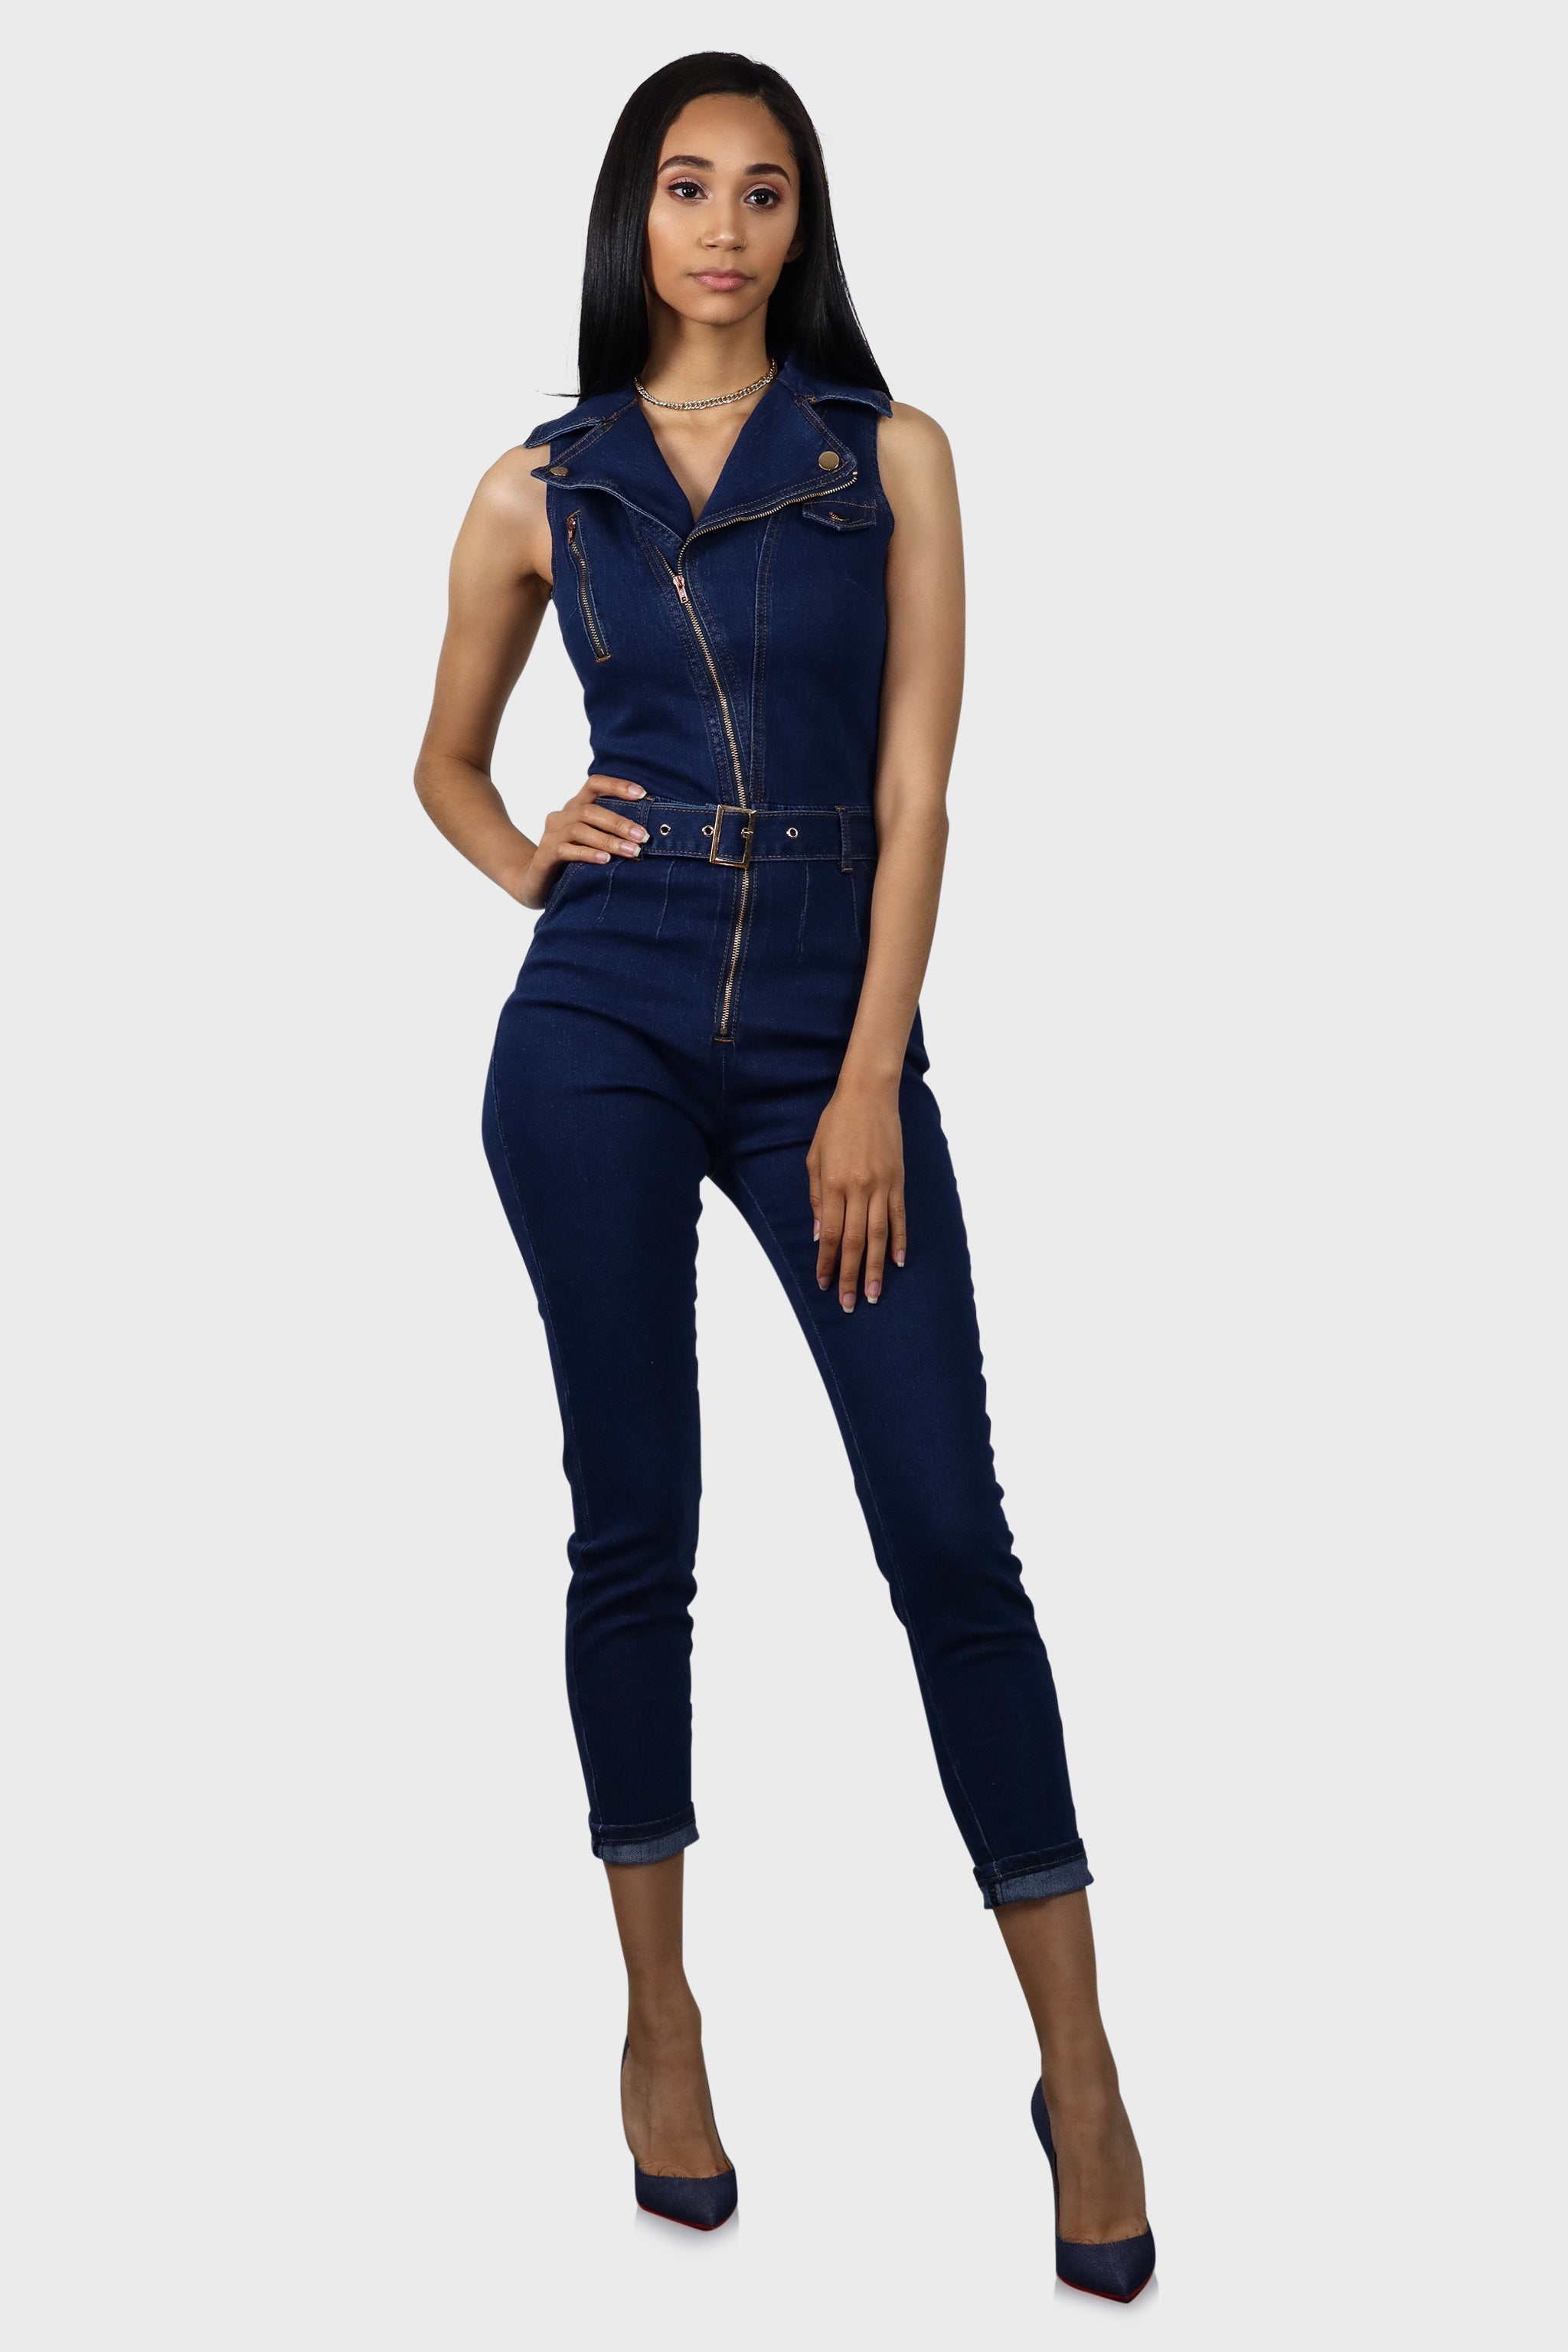 Denim Jumpsuit Outfits That Will Have You Channeling the 1970s - College  Fashion